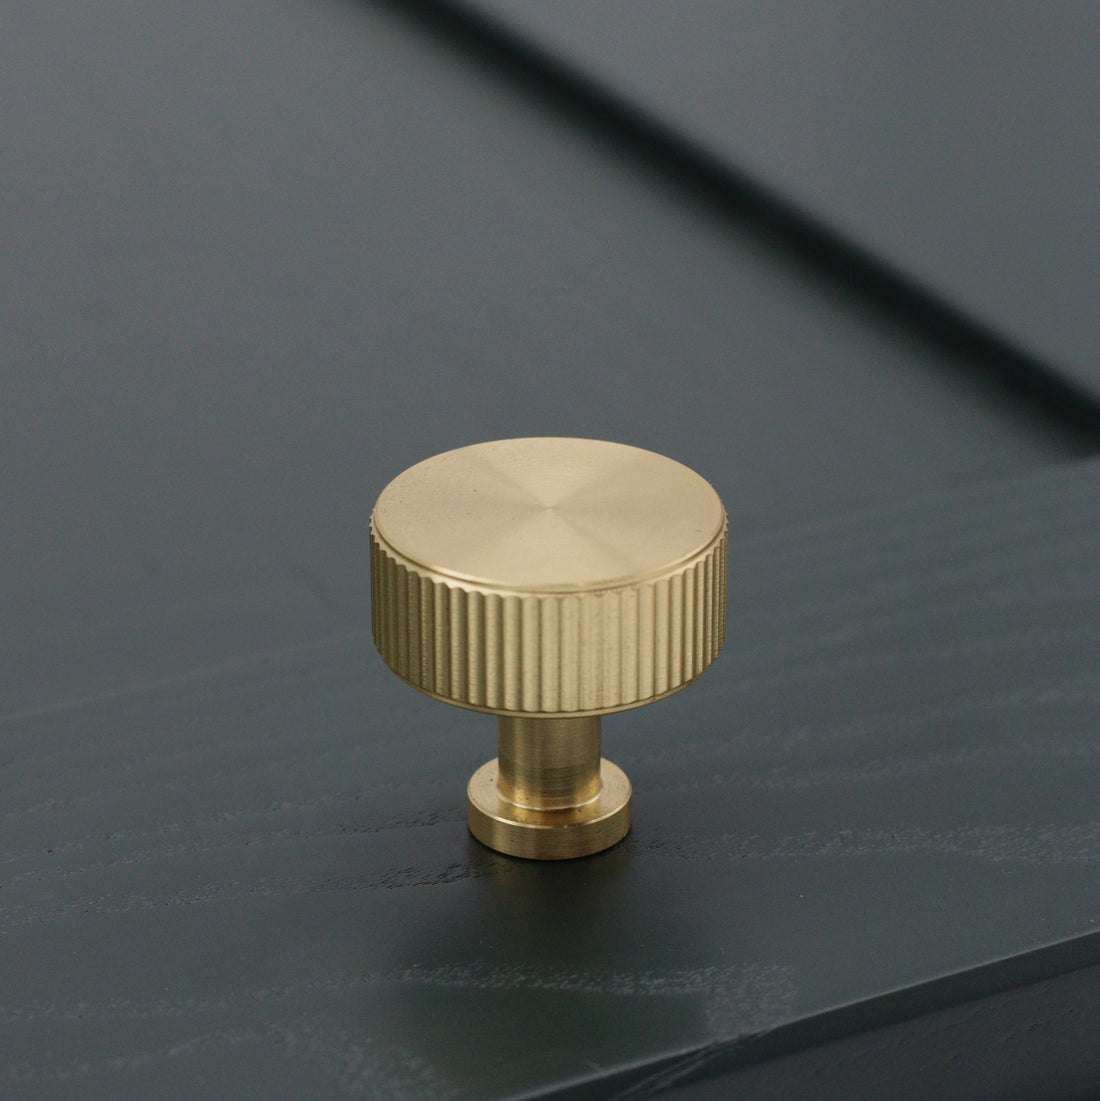 satin brass fluted pull knob on dark cabinetry - Callington Collection Clemo + Finch, Kent